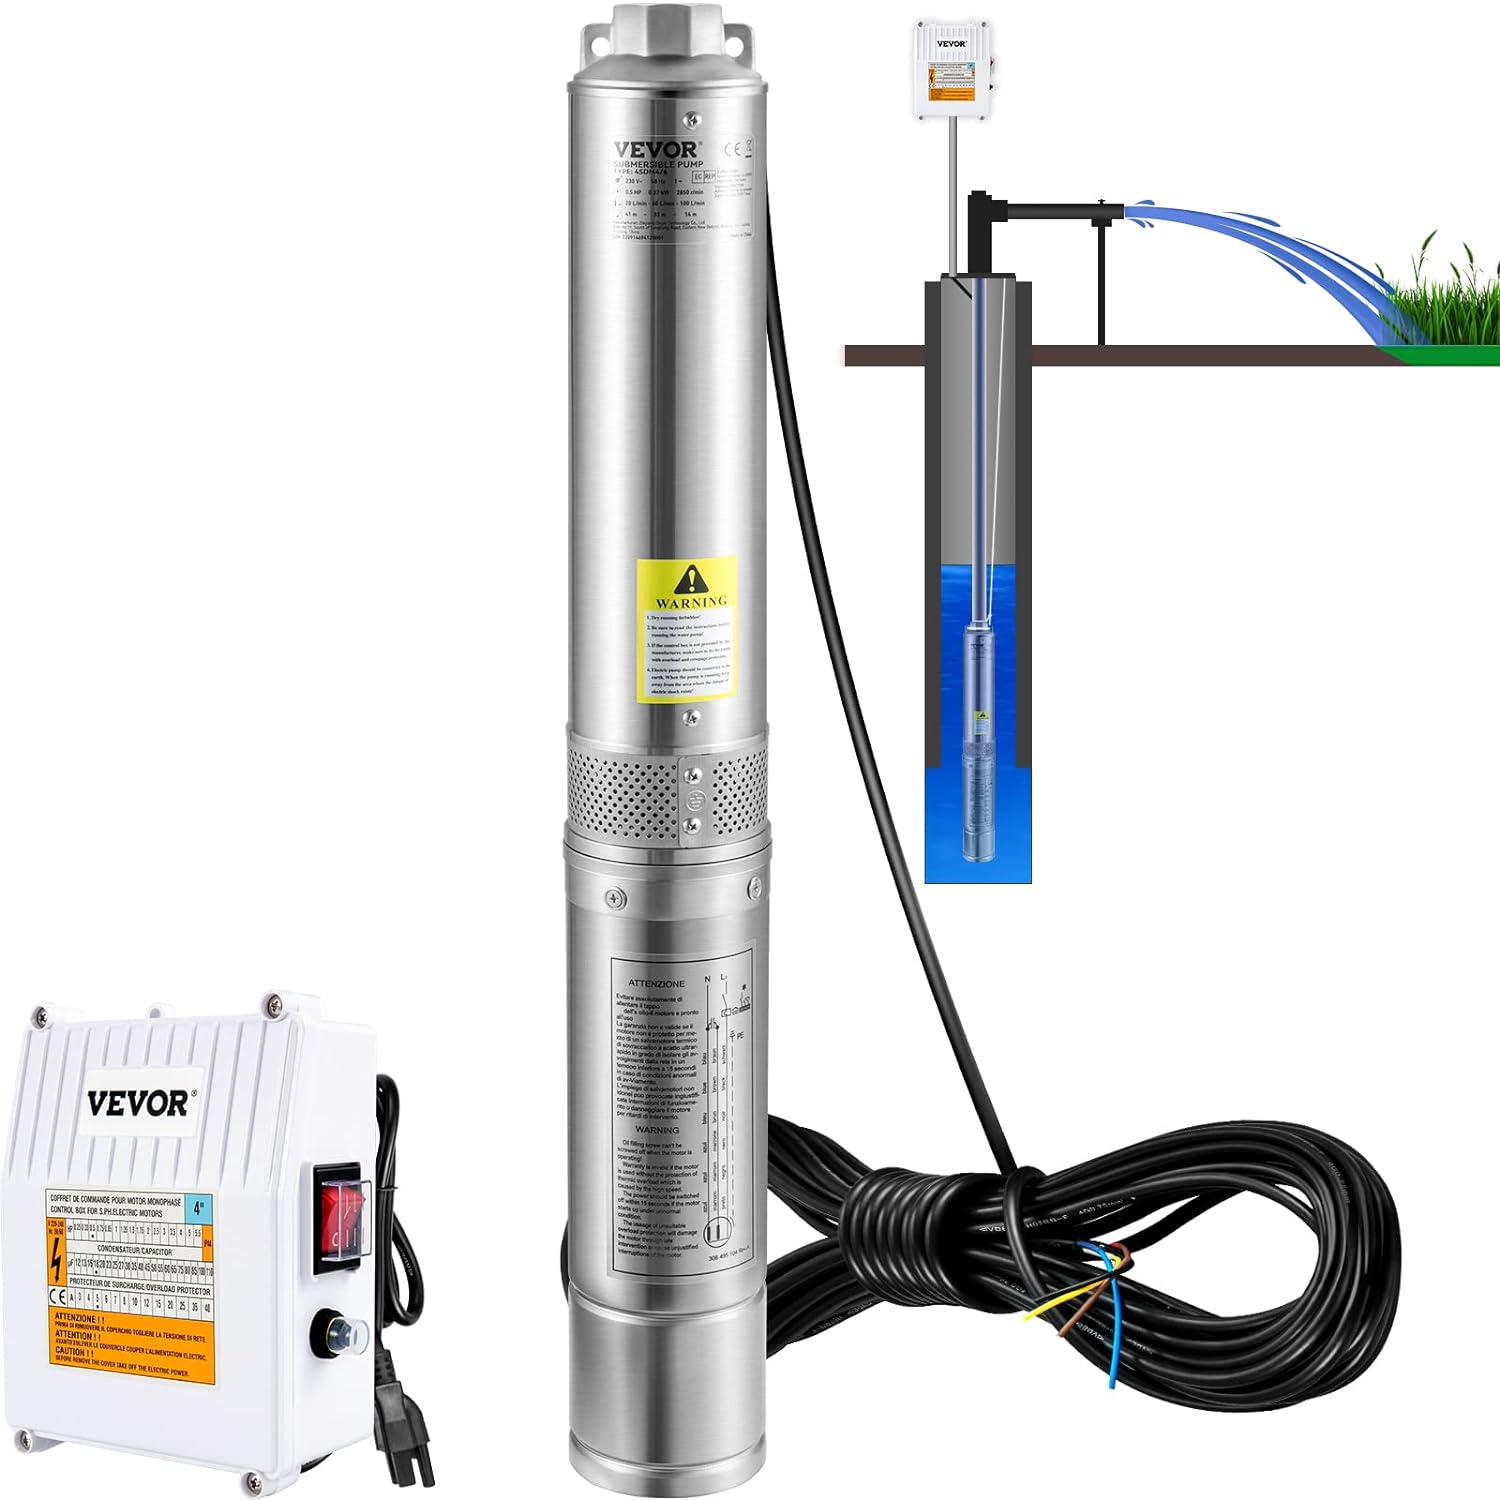 VEVOR Deep Well Submersible Pump, 3HP 230V/60Hz, 37GPM 640 ft Head, with 33 ft Cord  External Control Box, 4 inch Stainless Steel Water Pumps for Industrial, Irrigation and Home Use, IP68 Waterproof